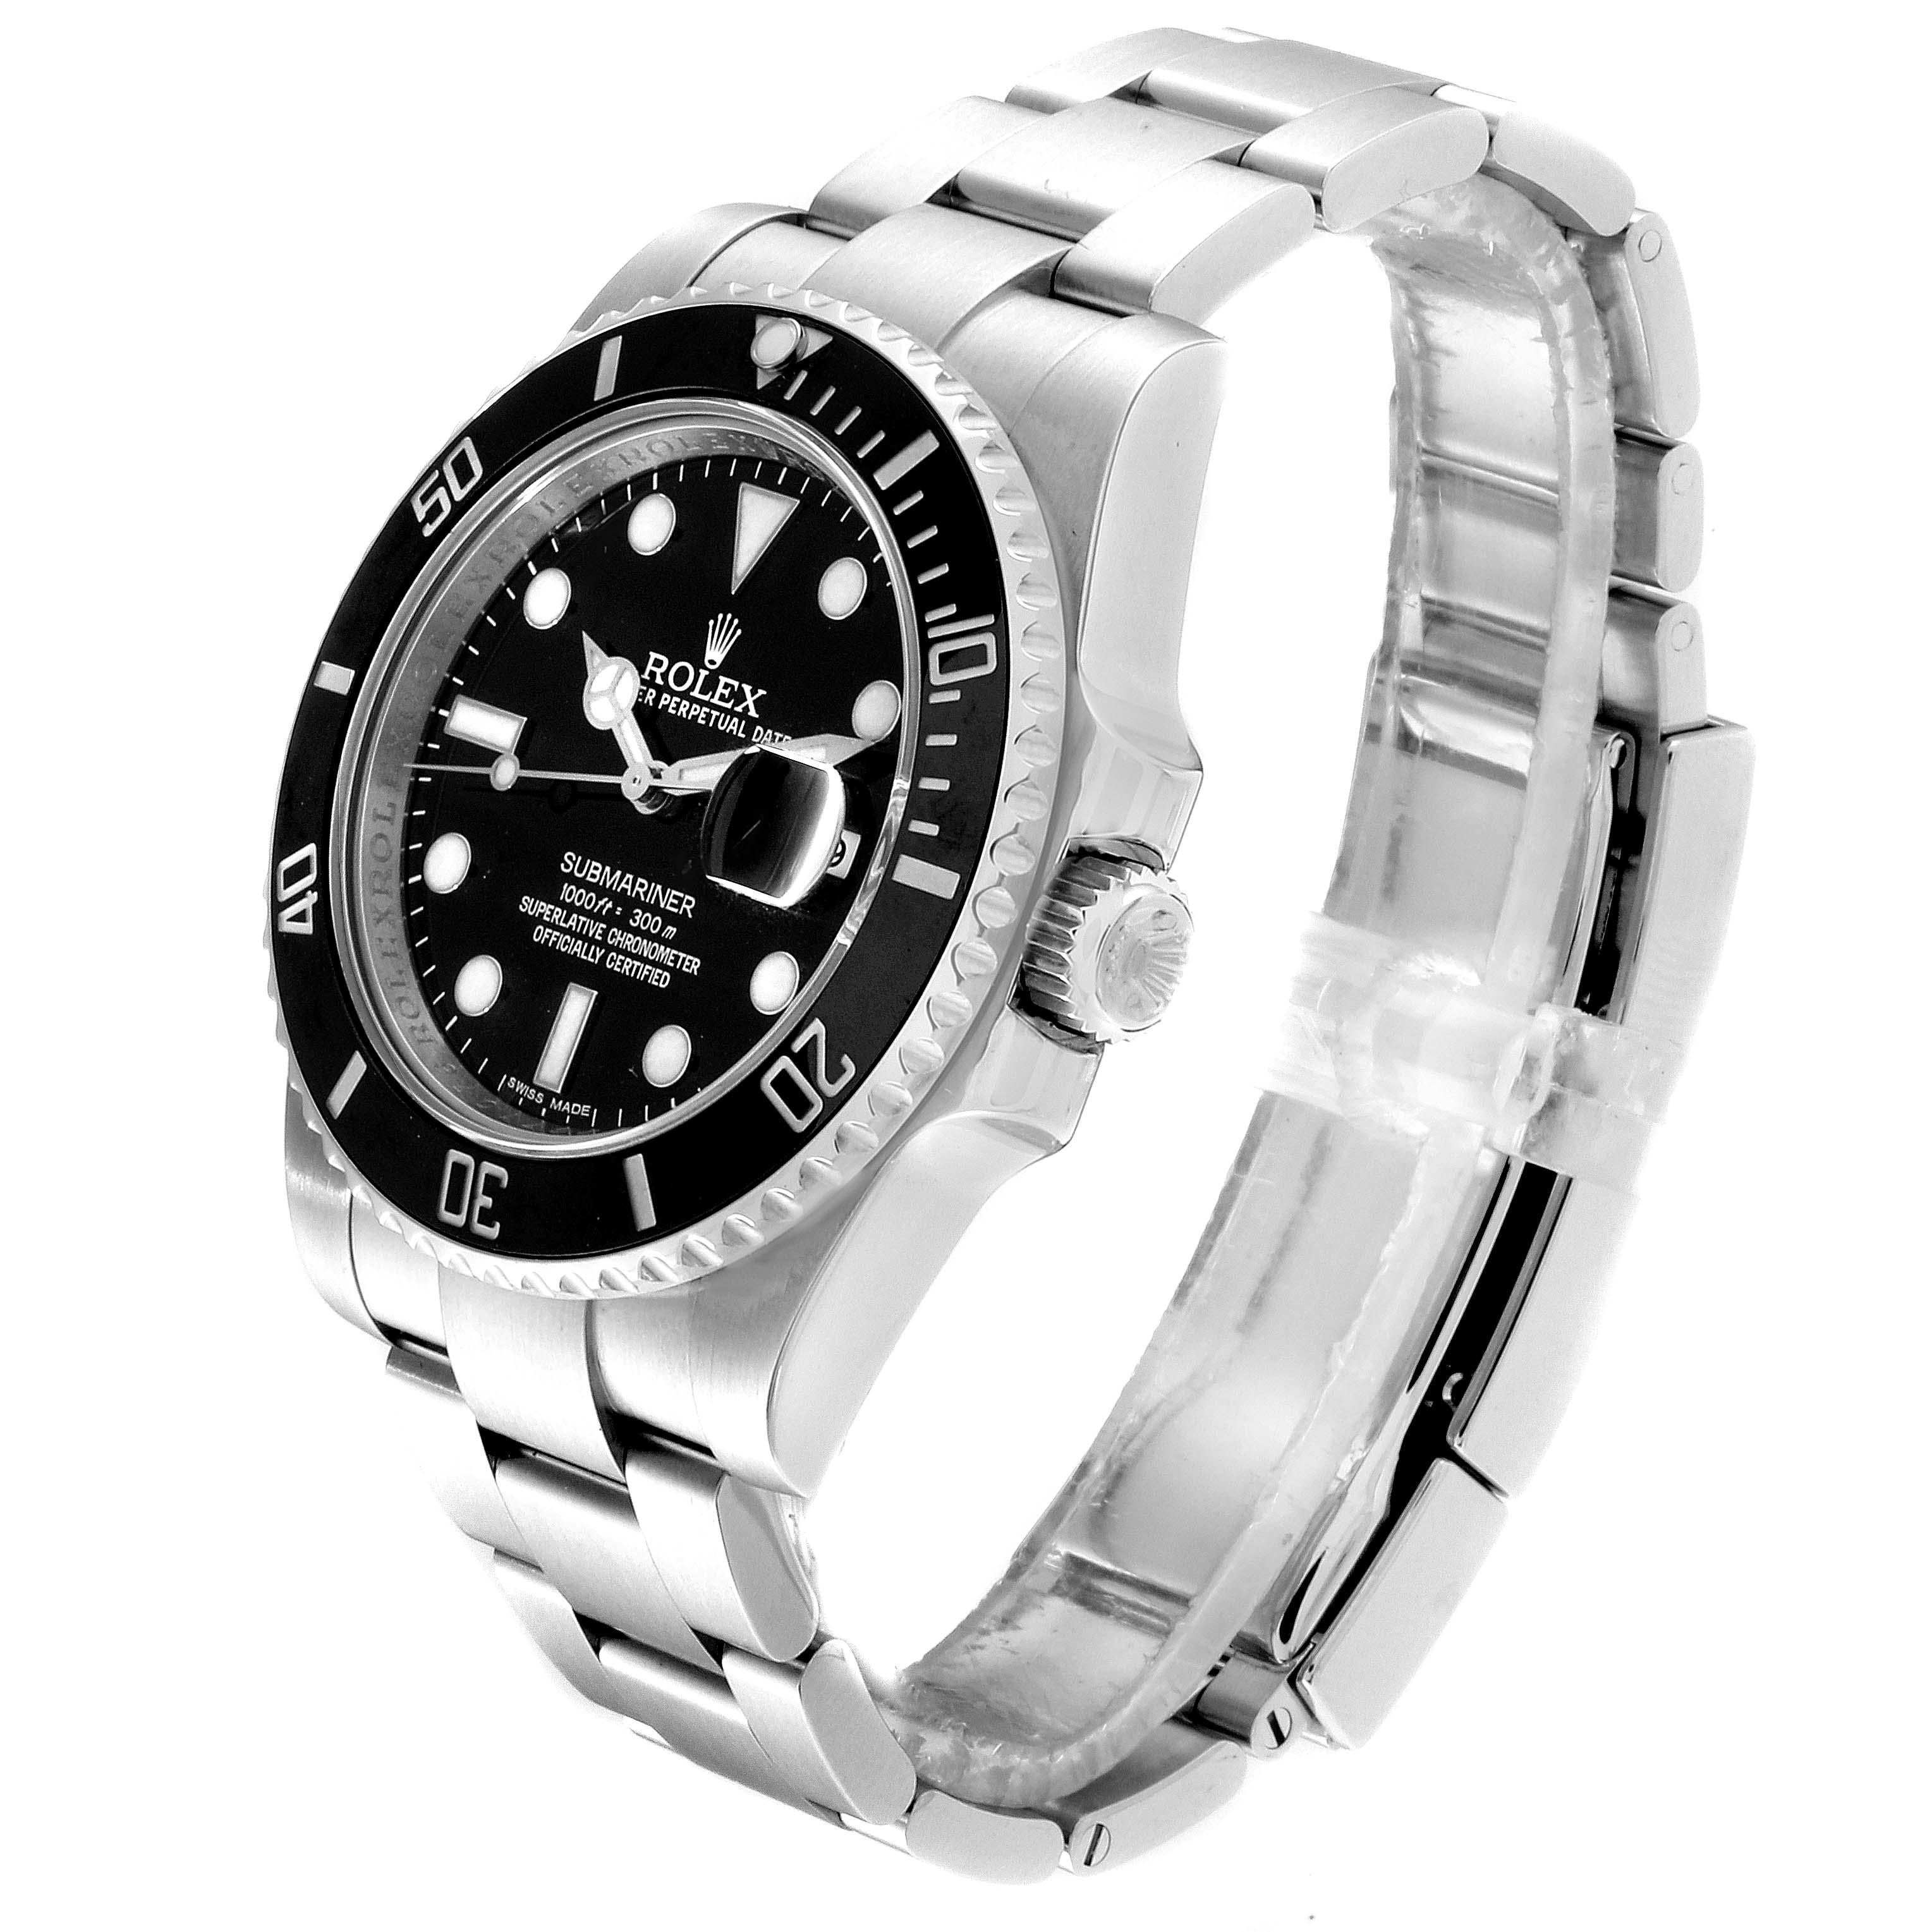 Rolex Submariner 40 Cerachrom Bezel Black Dial Watch 116610 Box Card In Excellent Condition For Sale In Atlanta, GA